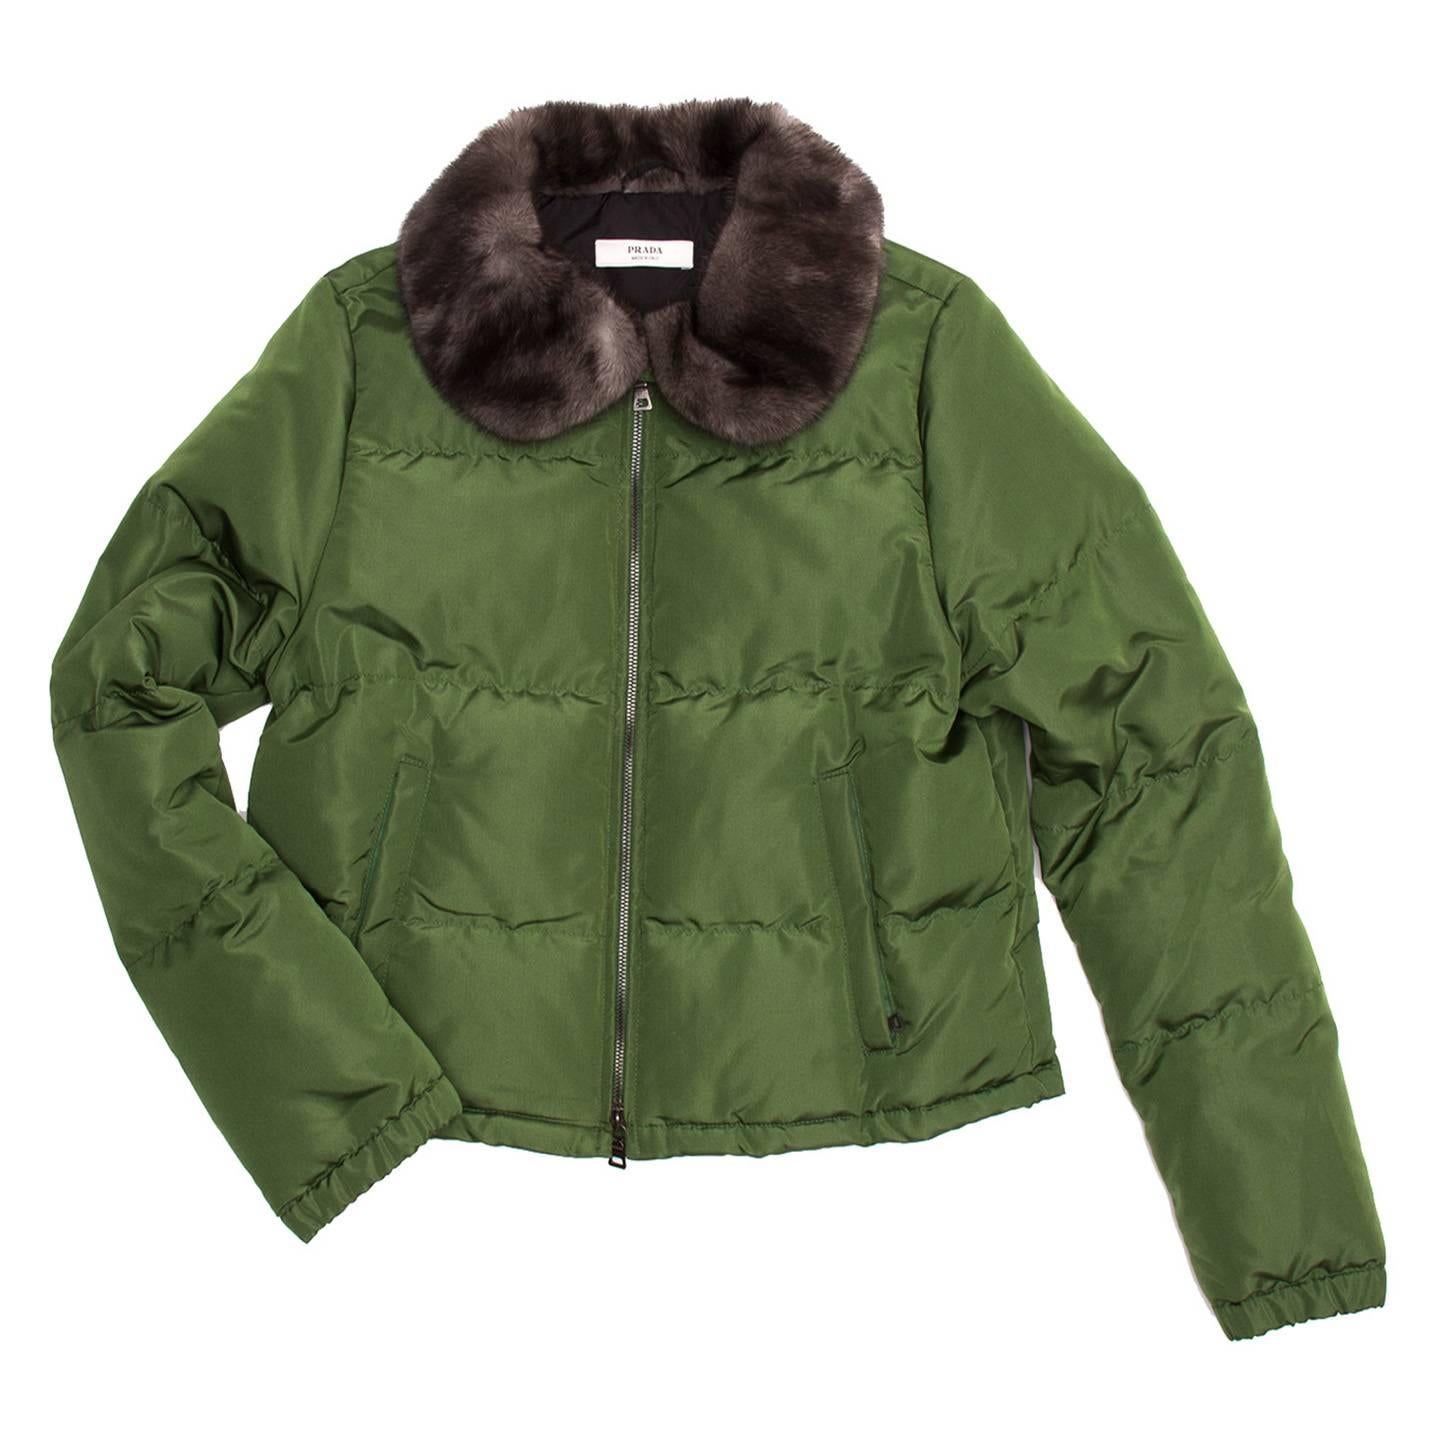 Bright green cropped goose down quilted jacket. The outer layer is a blend of silk and polyester and the peter pan collar is covered in mink fur.

Size  46 Italian sizing

Condition  Excellent: never worn